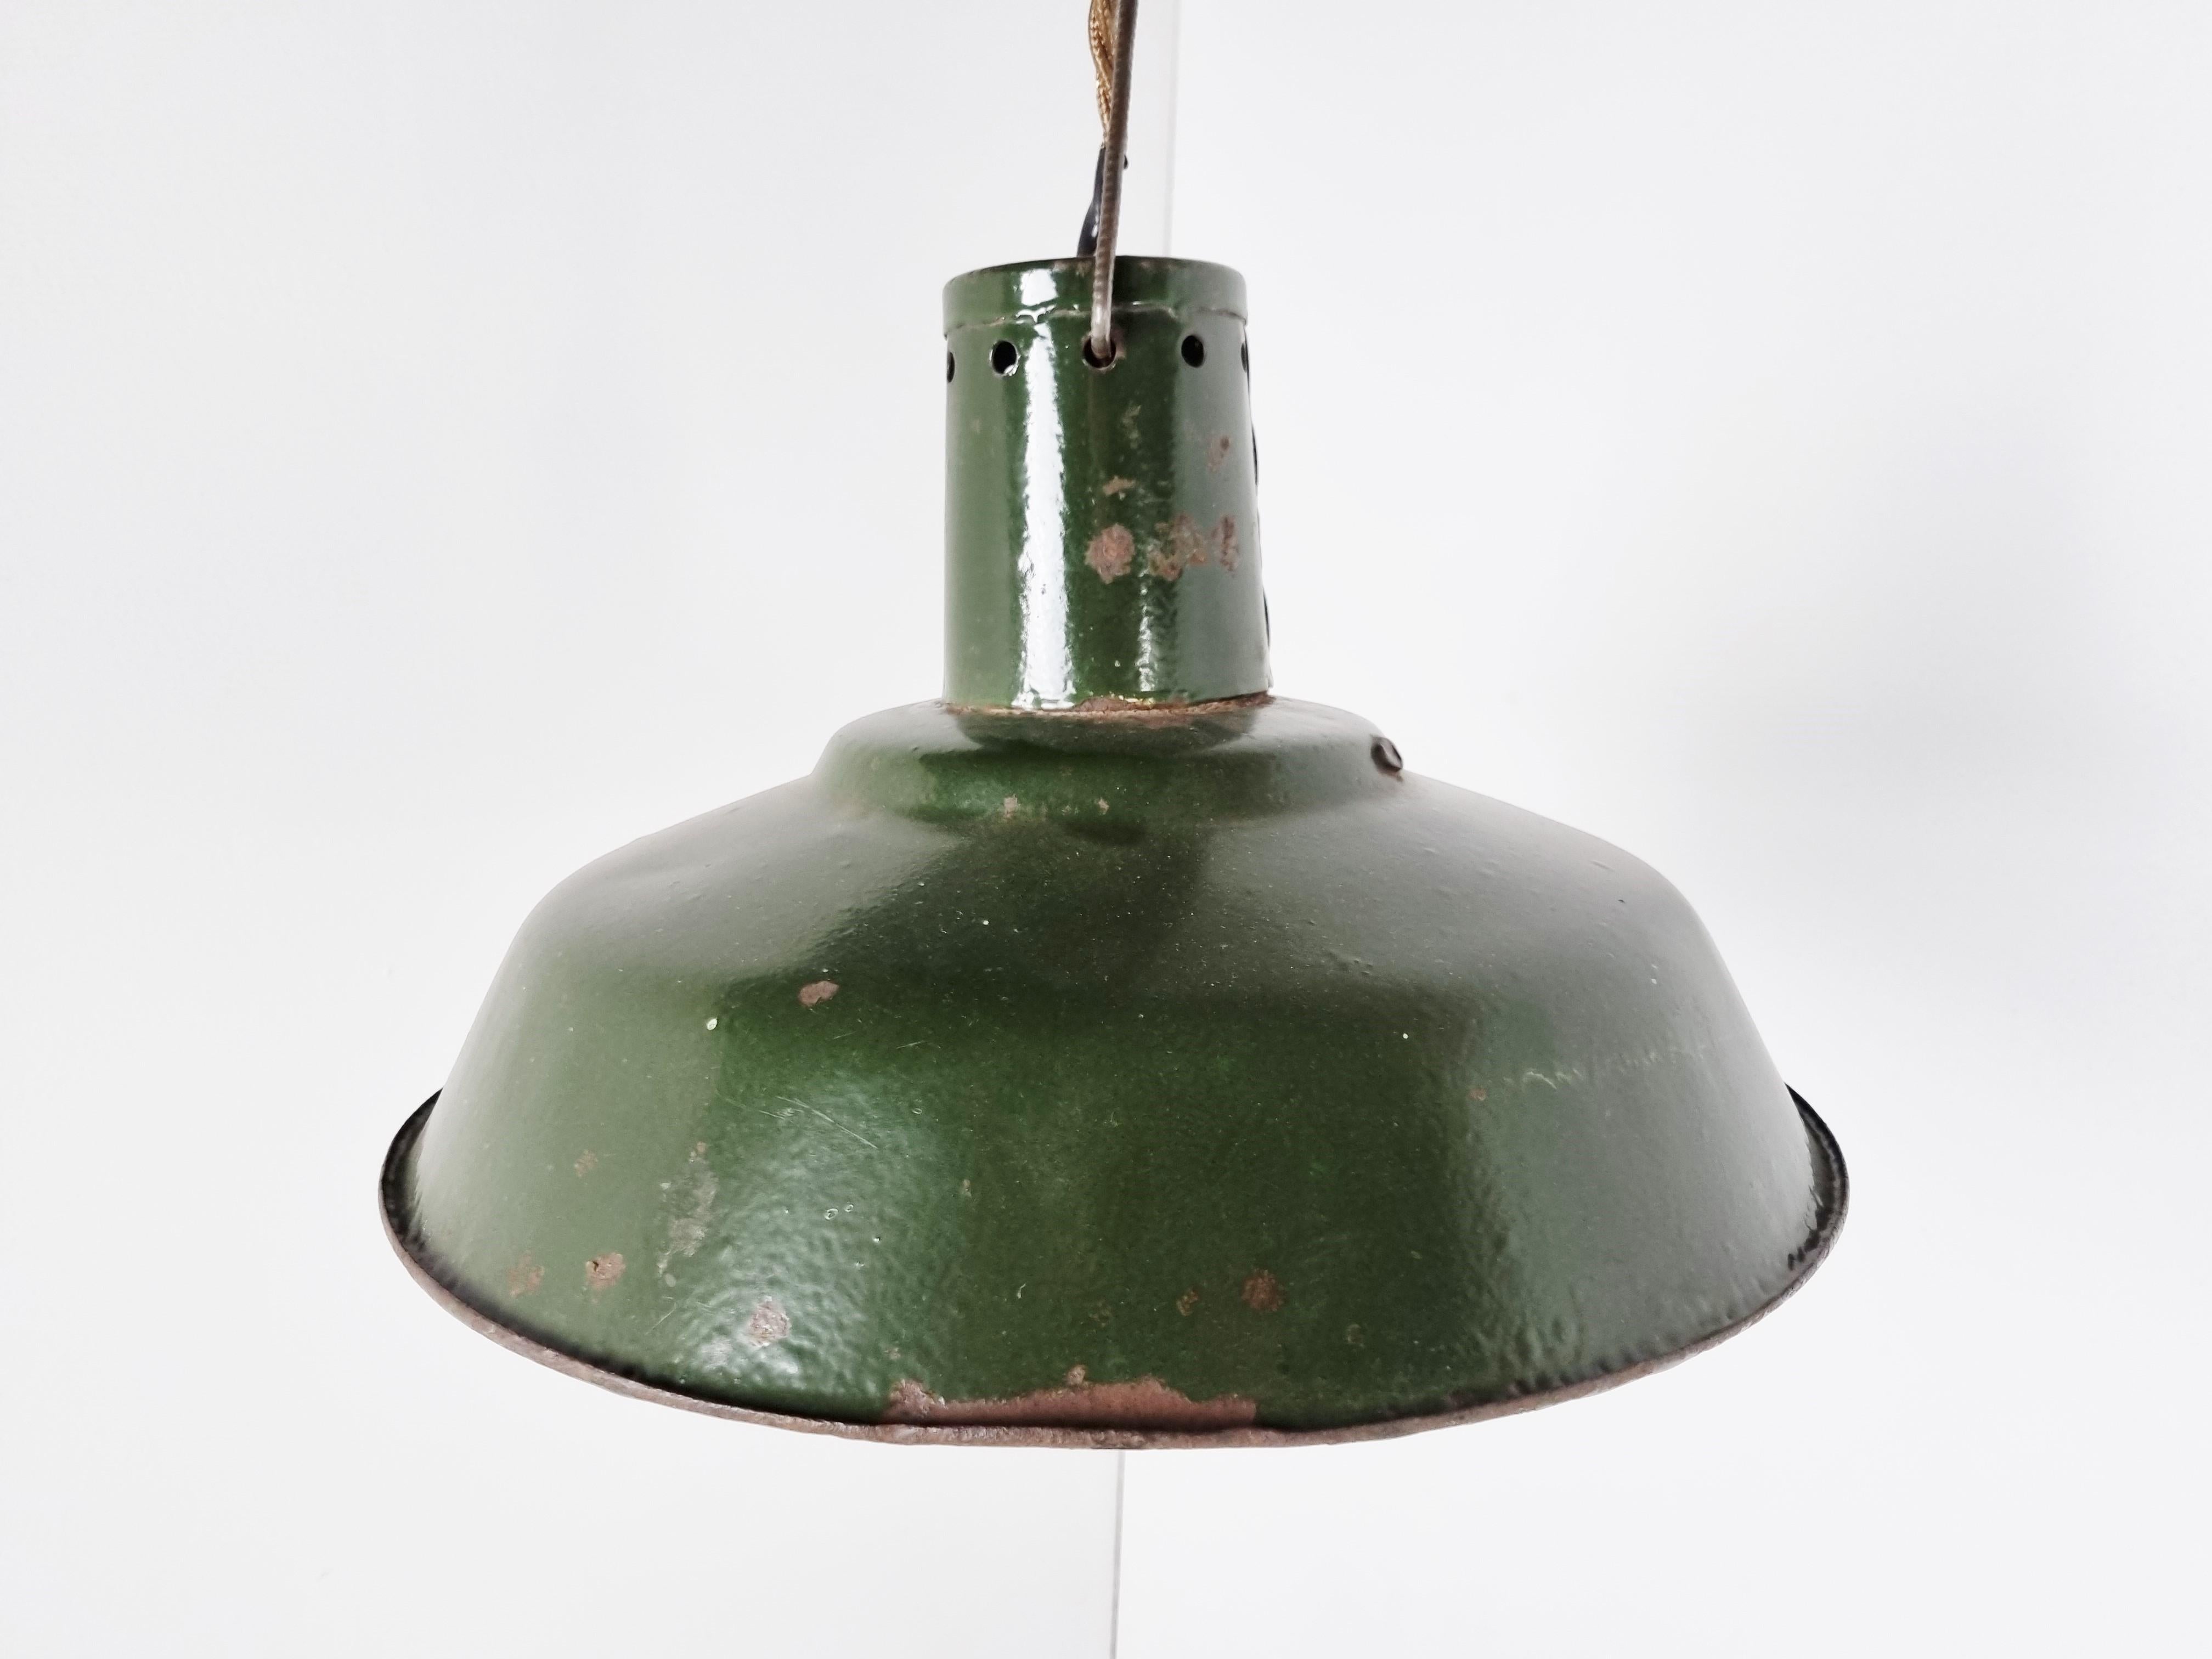 Vintage industrial pendant lights in dark green enamel. 

The lamps emit a soft light thanks to the white enamelled finish on the inside.

The lamps where salvaged in Latvia (former USSR) and have a beautiful patina

Fully rewired with a nice